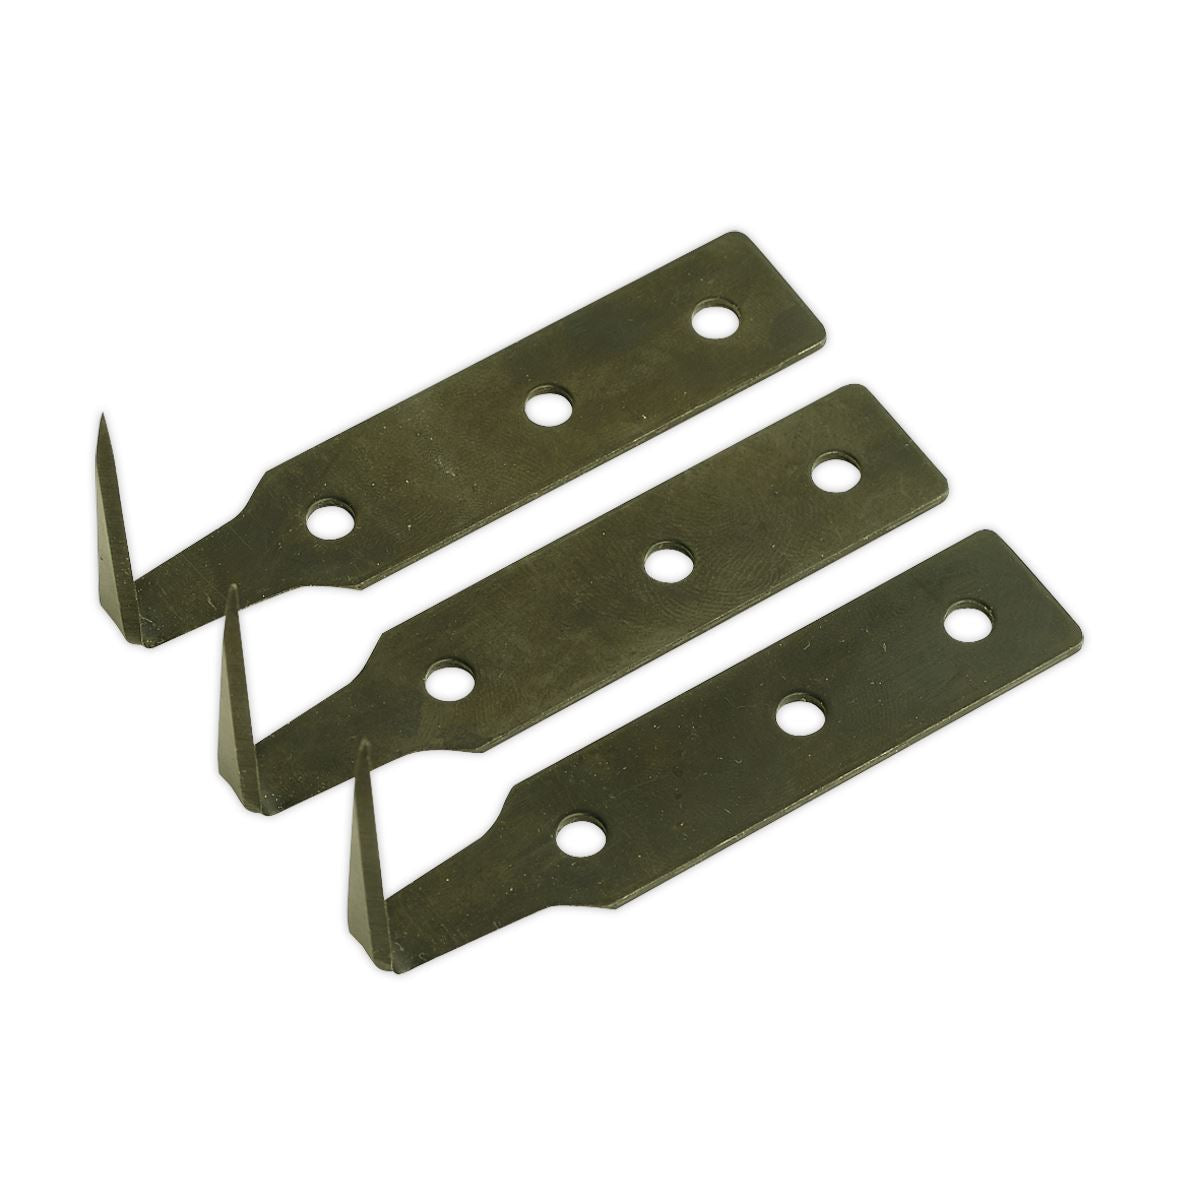 Sealey Windscreen Removal Tool Blade 38mm Pack of 3